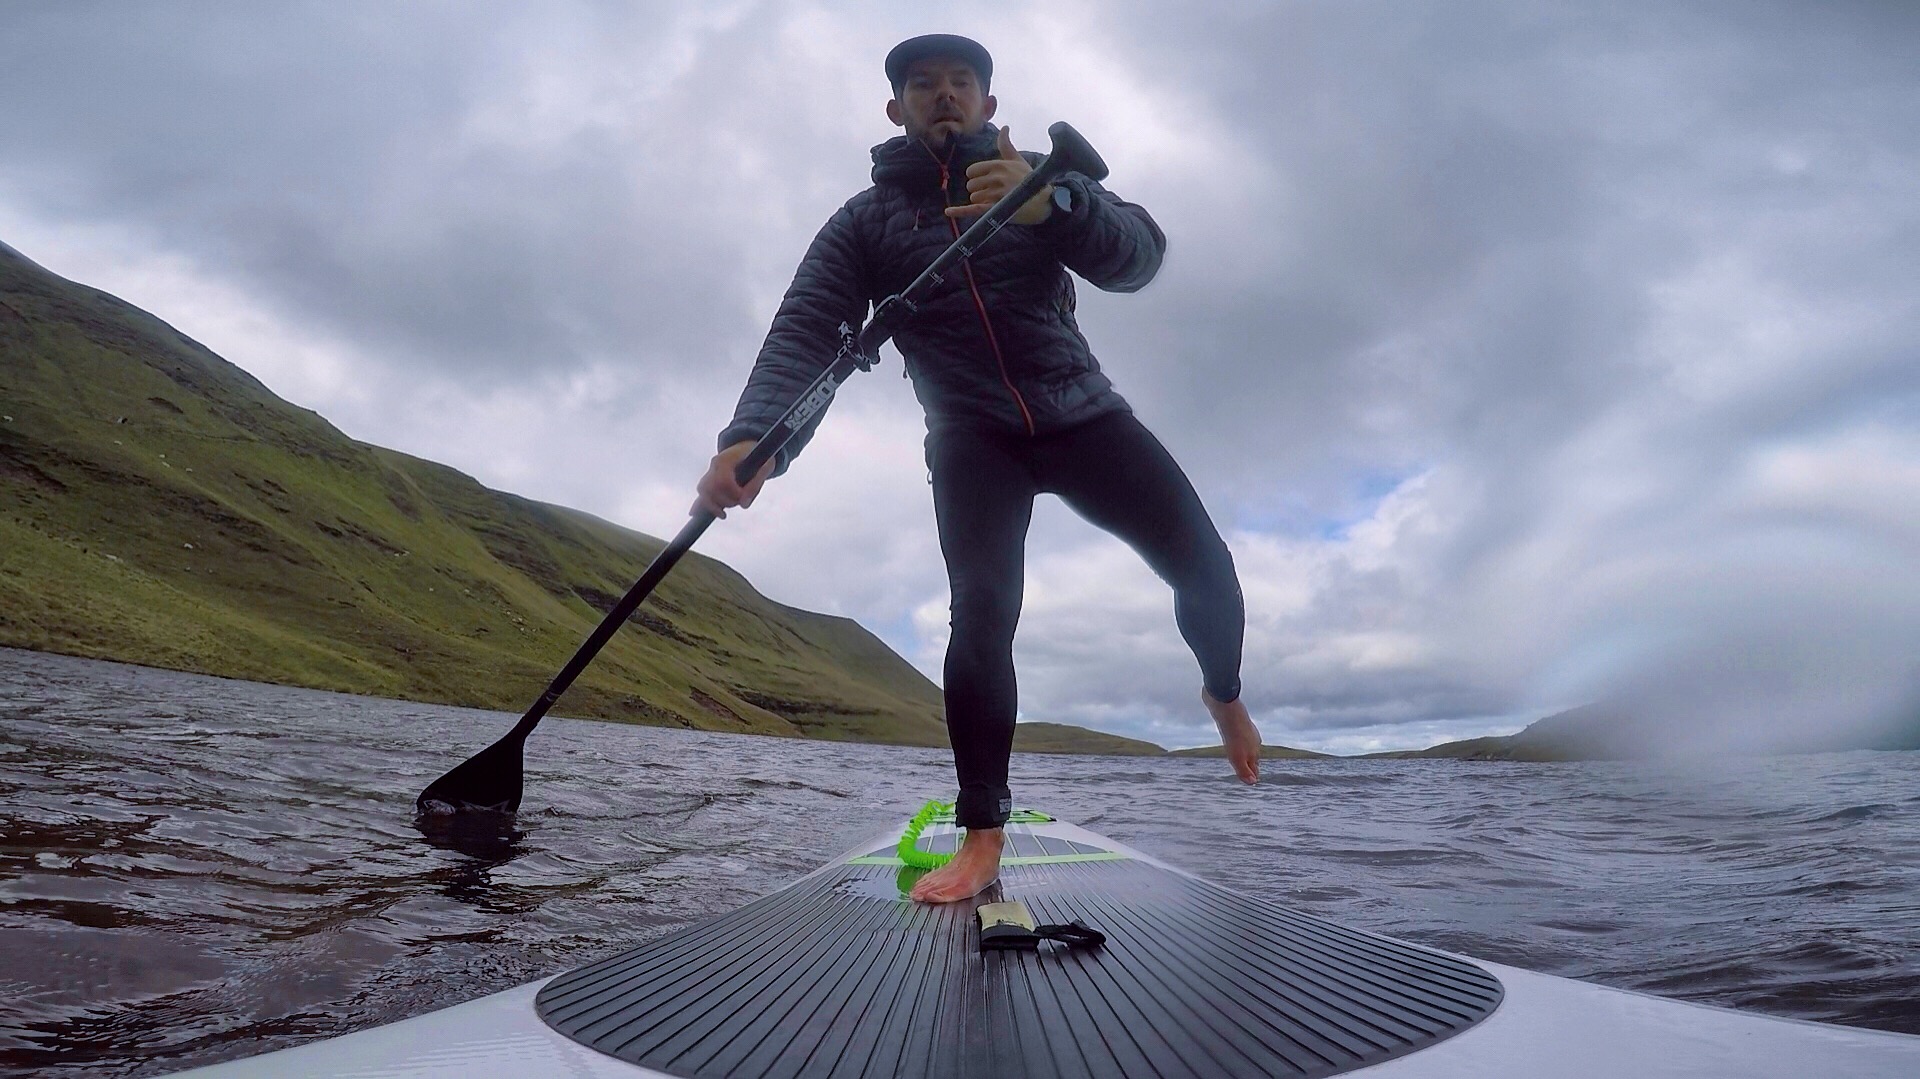 Winter paddle boarding trip: the 2 most beautiful mountain lakes in the south of Wales